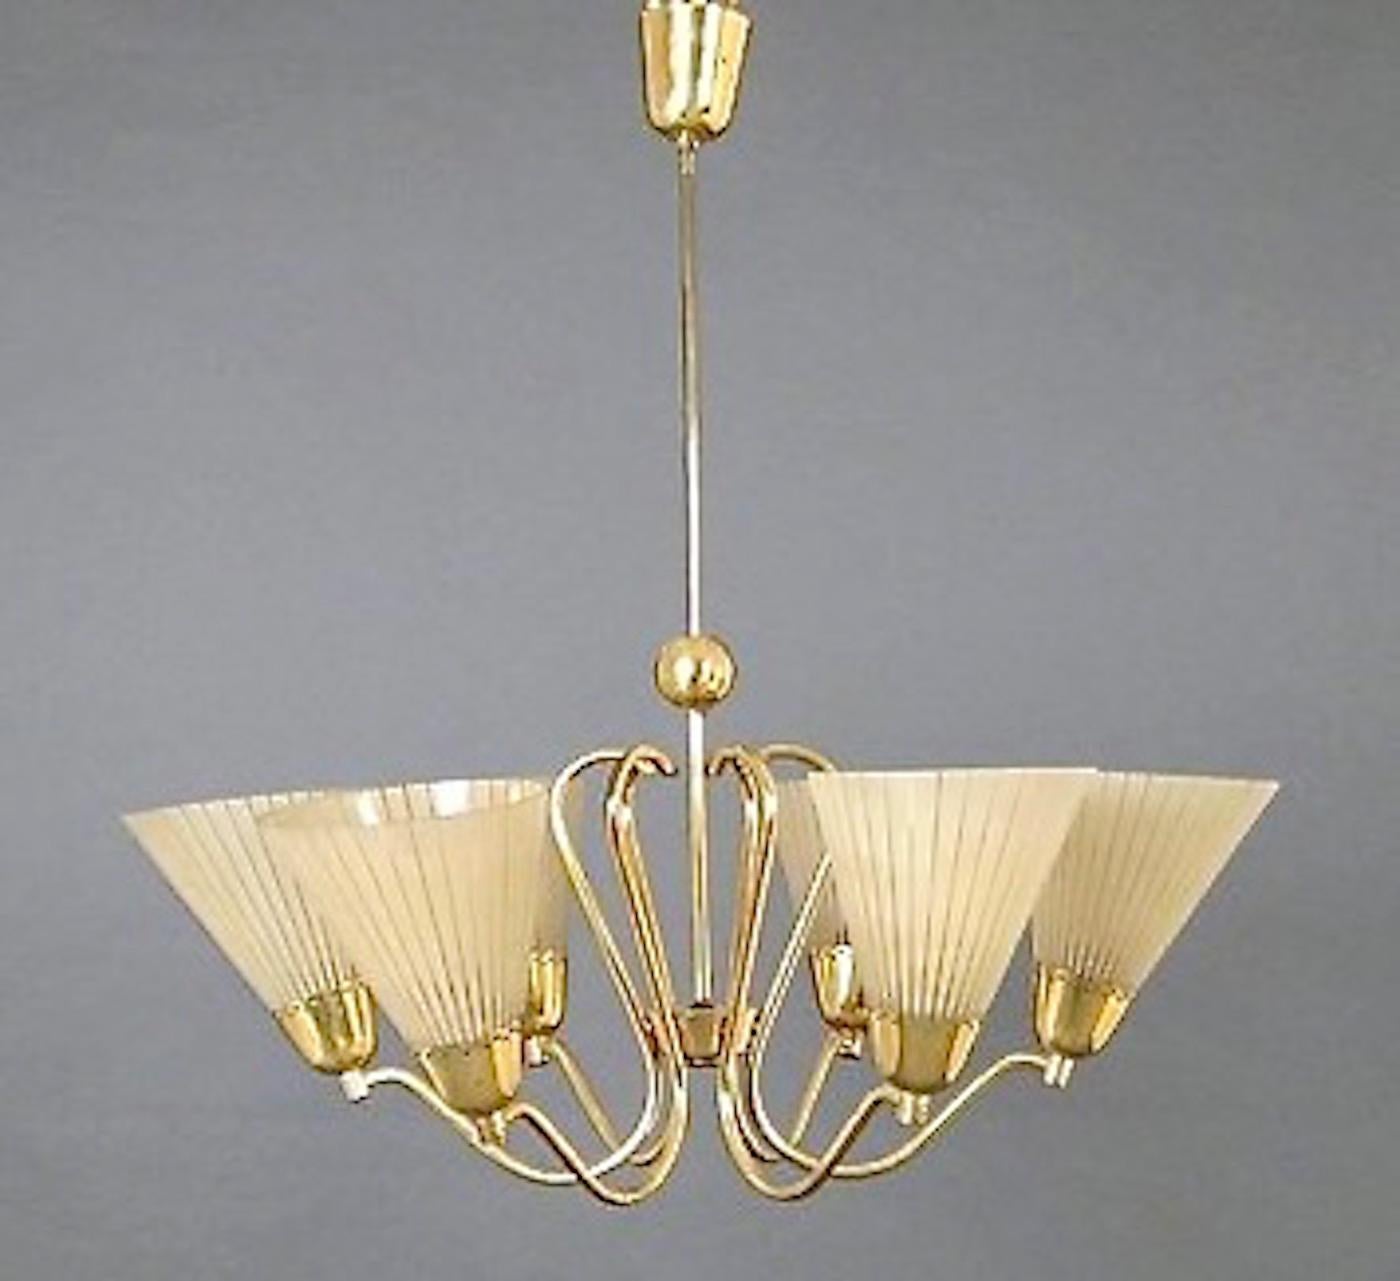 Beautiful Mid-Century Six Light German Brass & Etched Glass Chandelier, 1950s For Sale 5